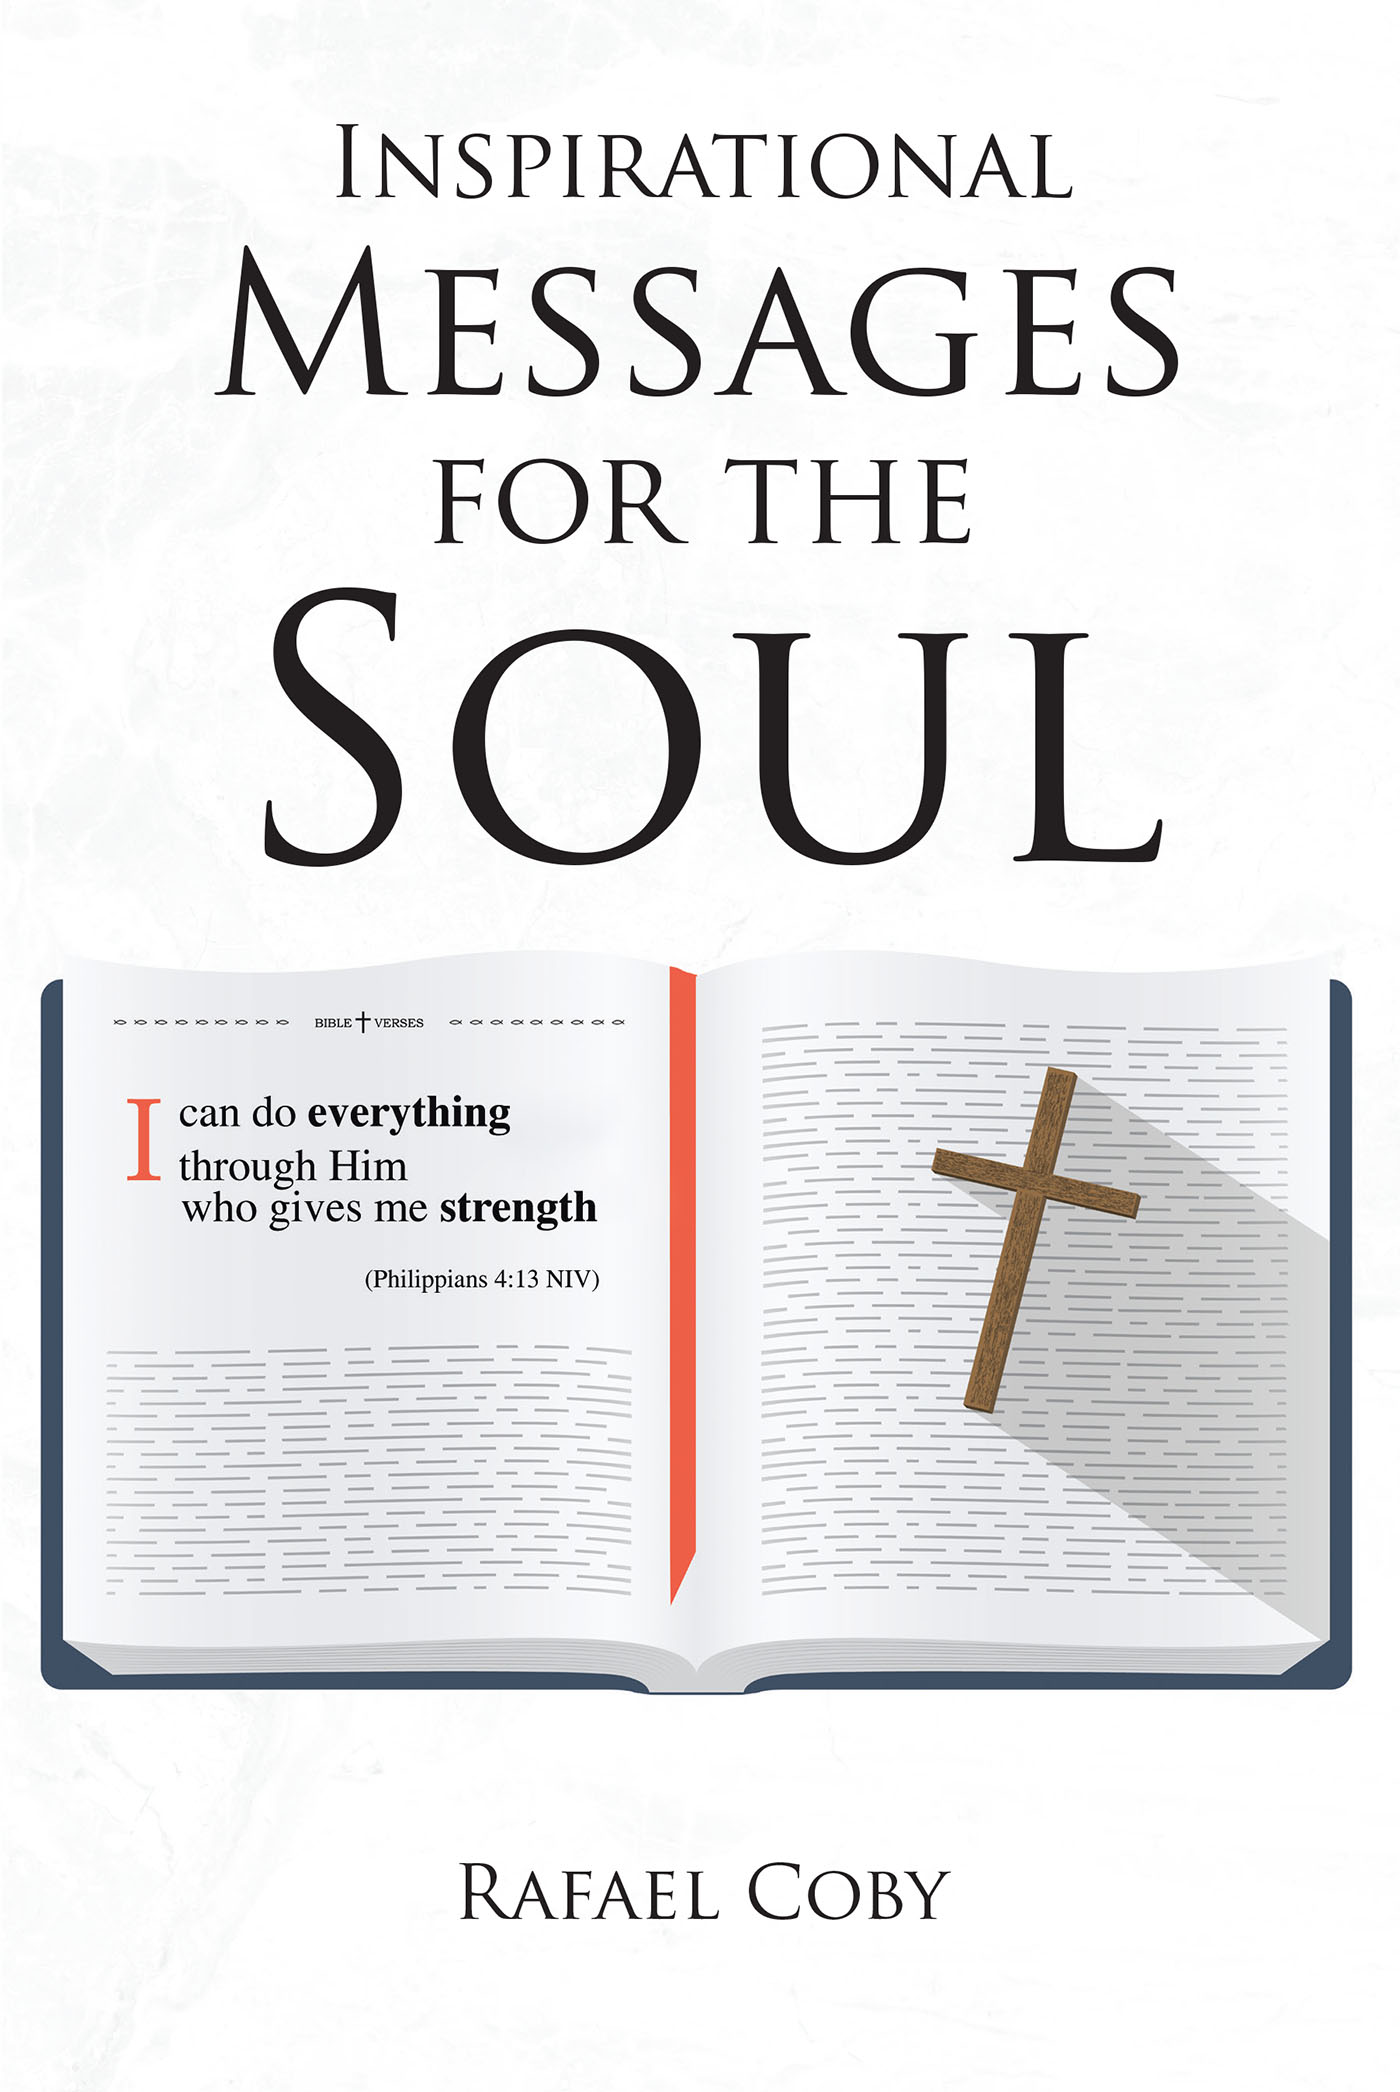 Author Rafael Coby’s New Book, "Inspirational Messages for the Soul," Explores the Importance for One’s Soul to Form a Steadfast Relationship with Christ